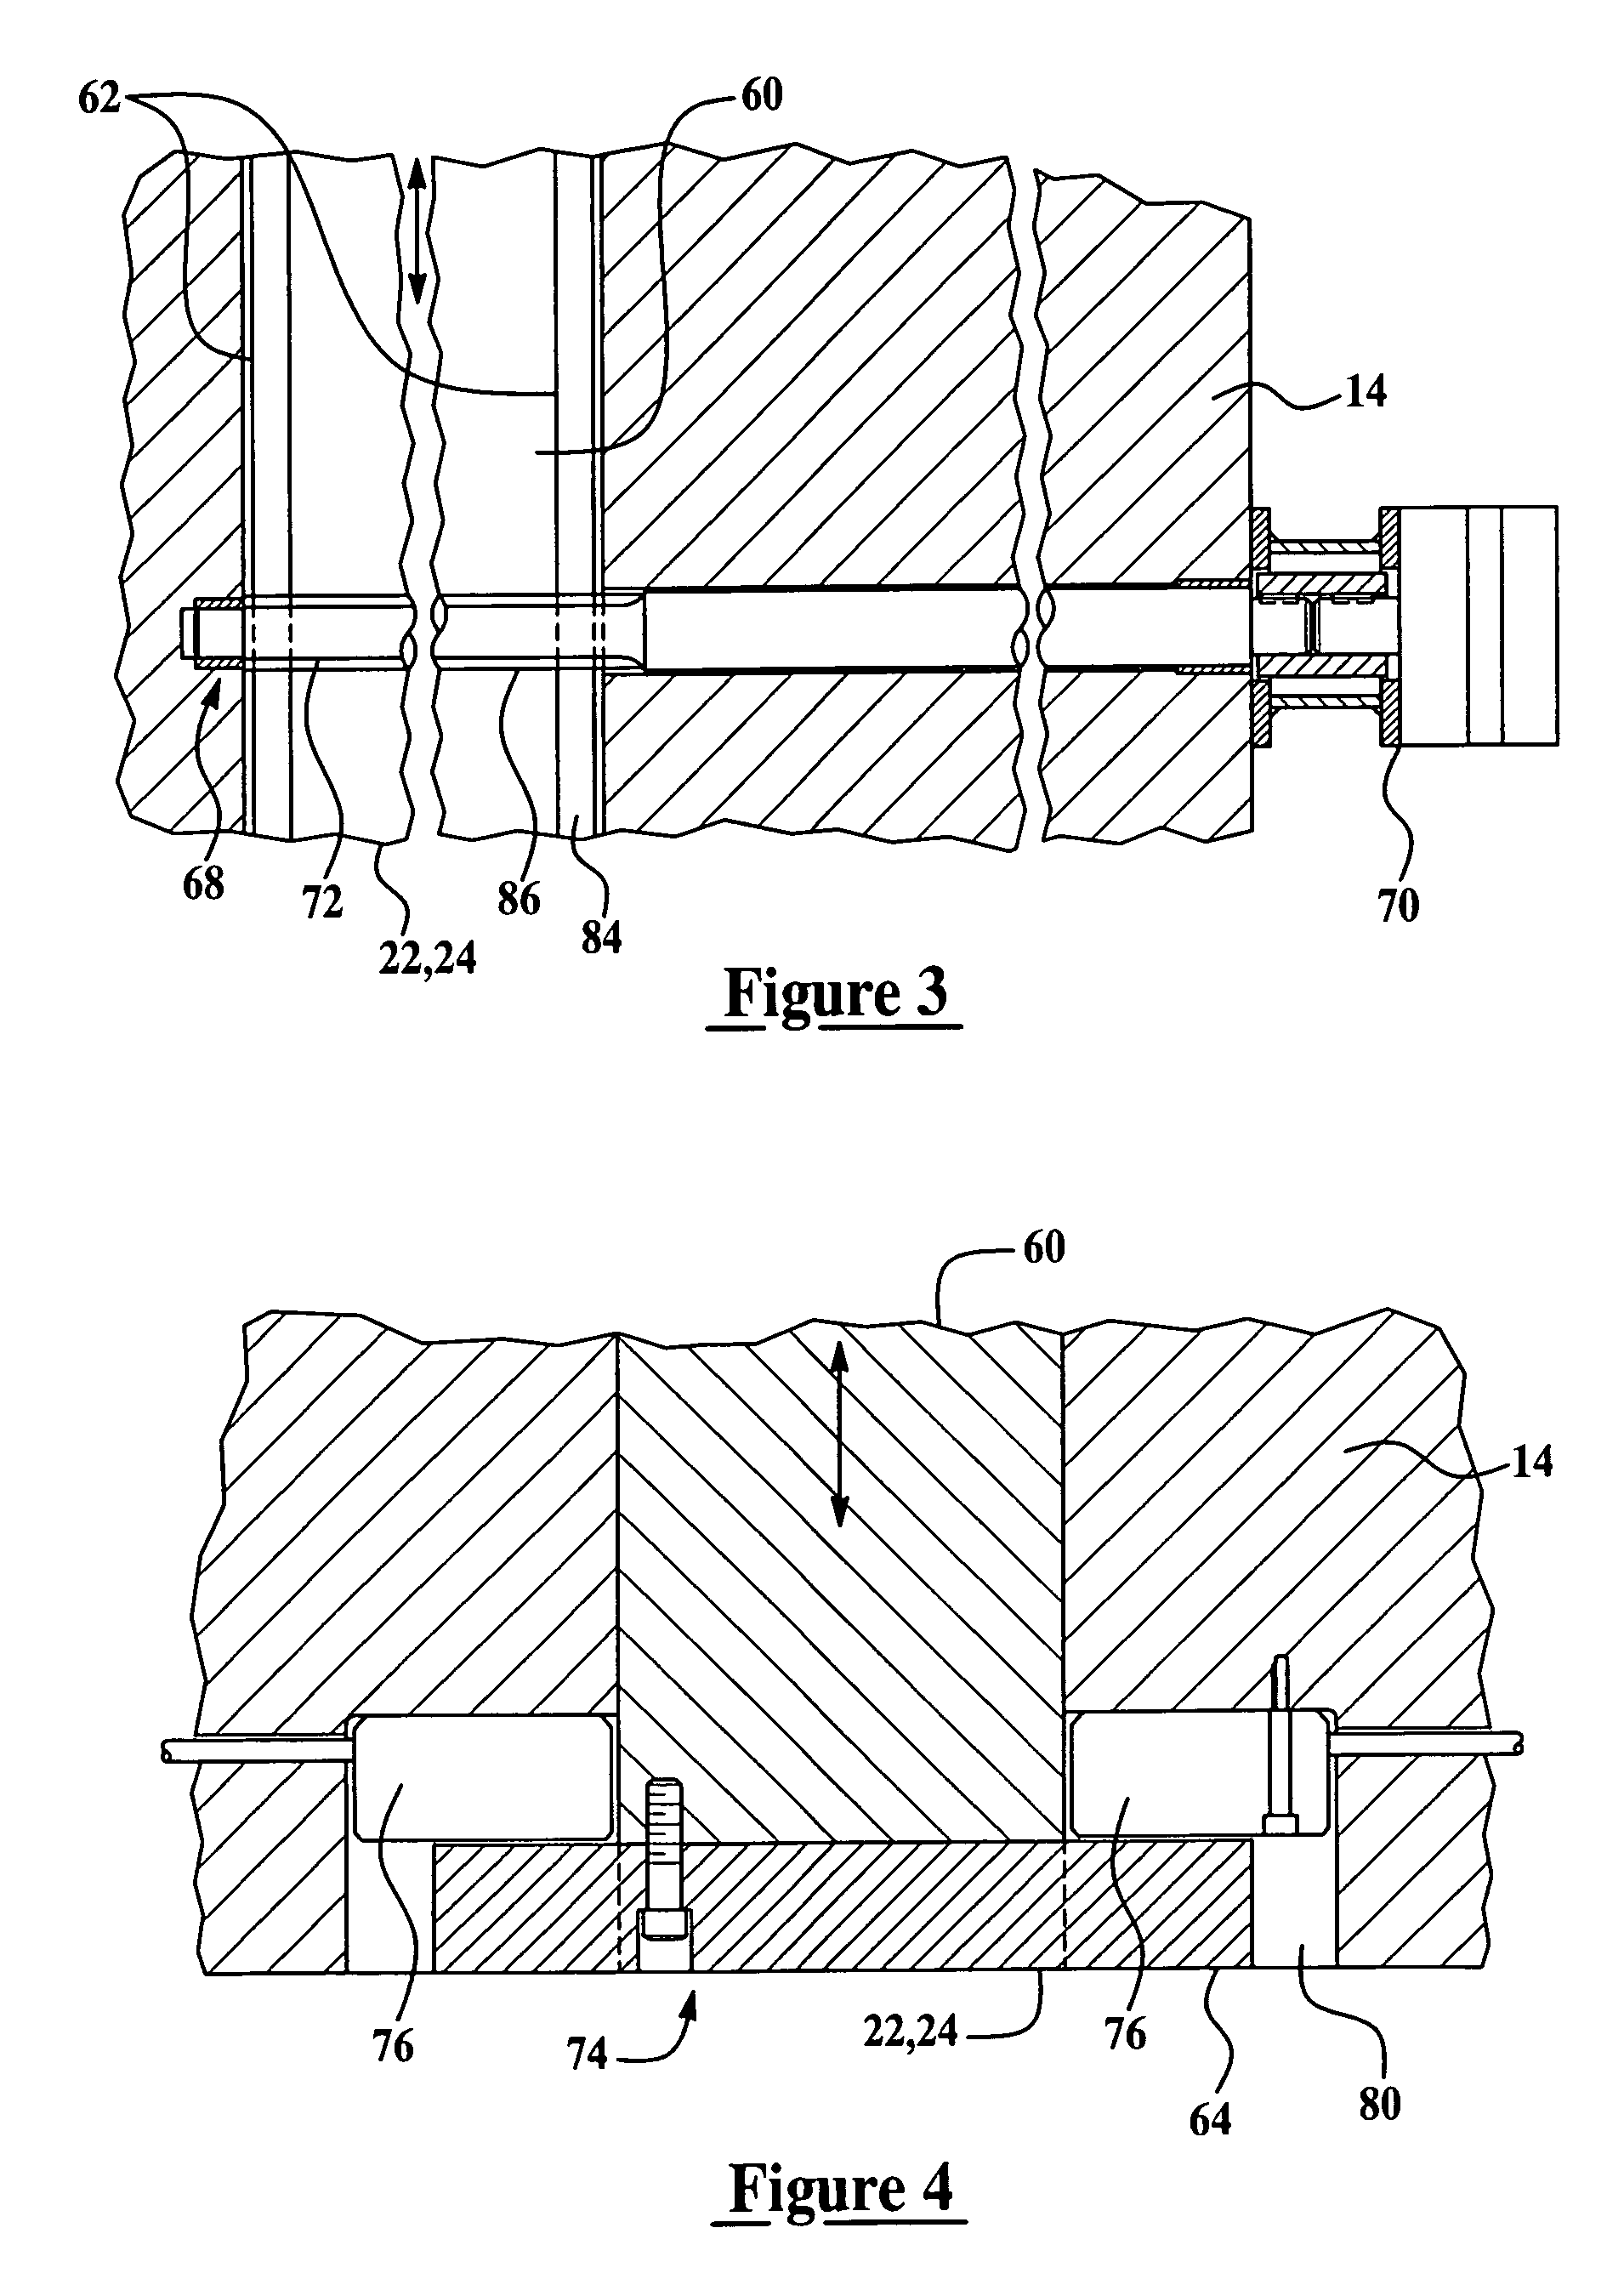 Engine block die-casting apparatus having mechanically actuated bank core slides